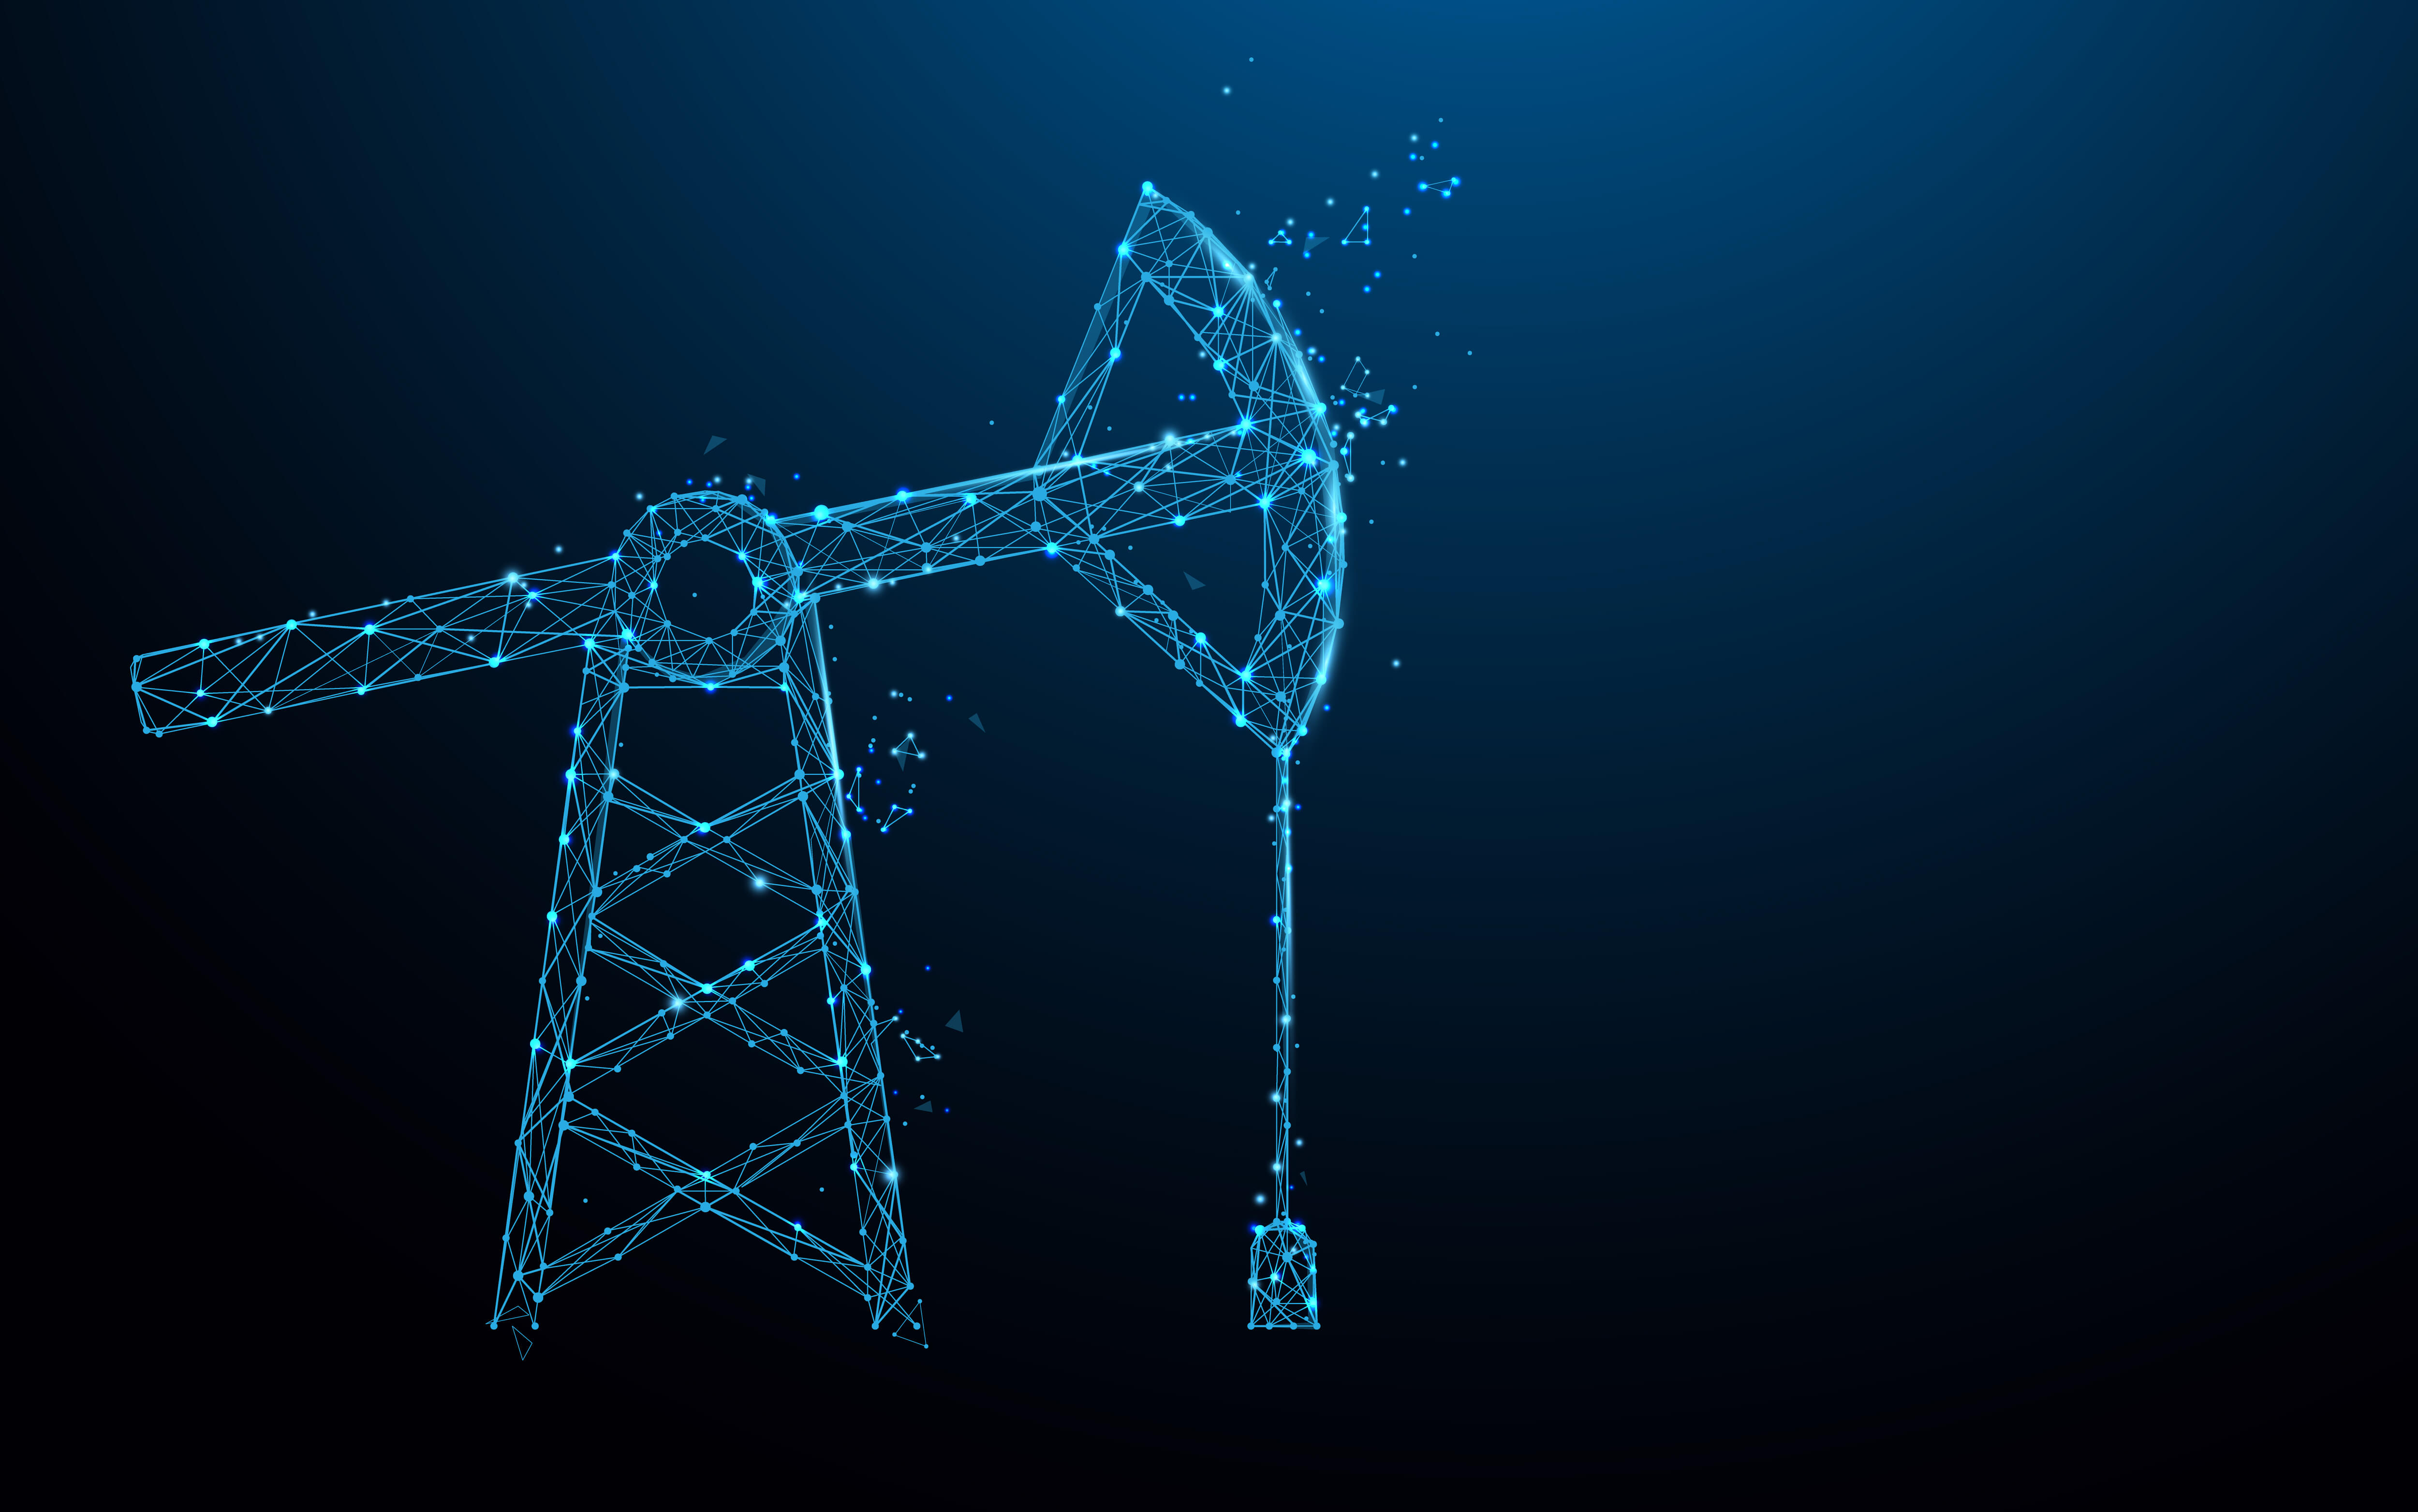 Managing and Responding to Advanced Cyber Risks in the Oil and Gas Industry